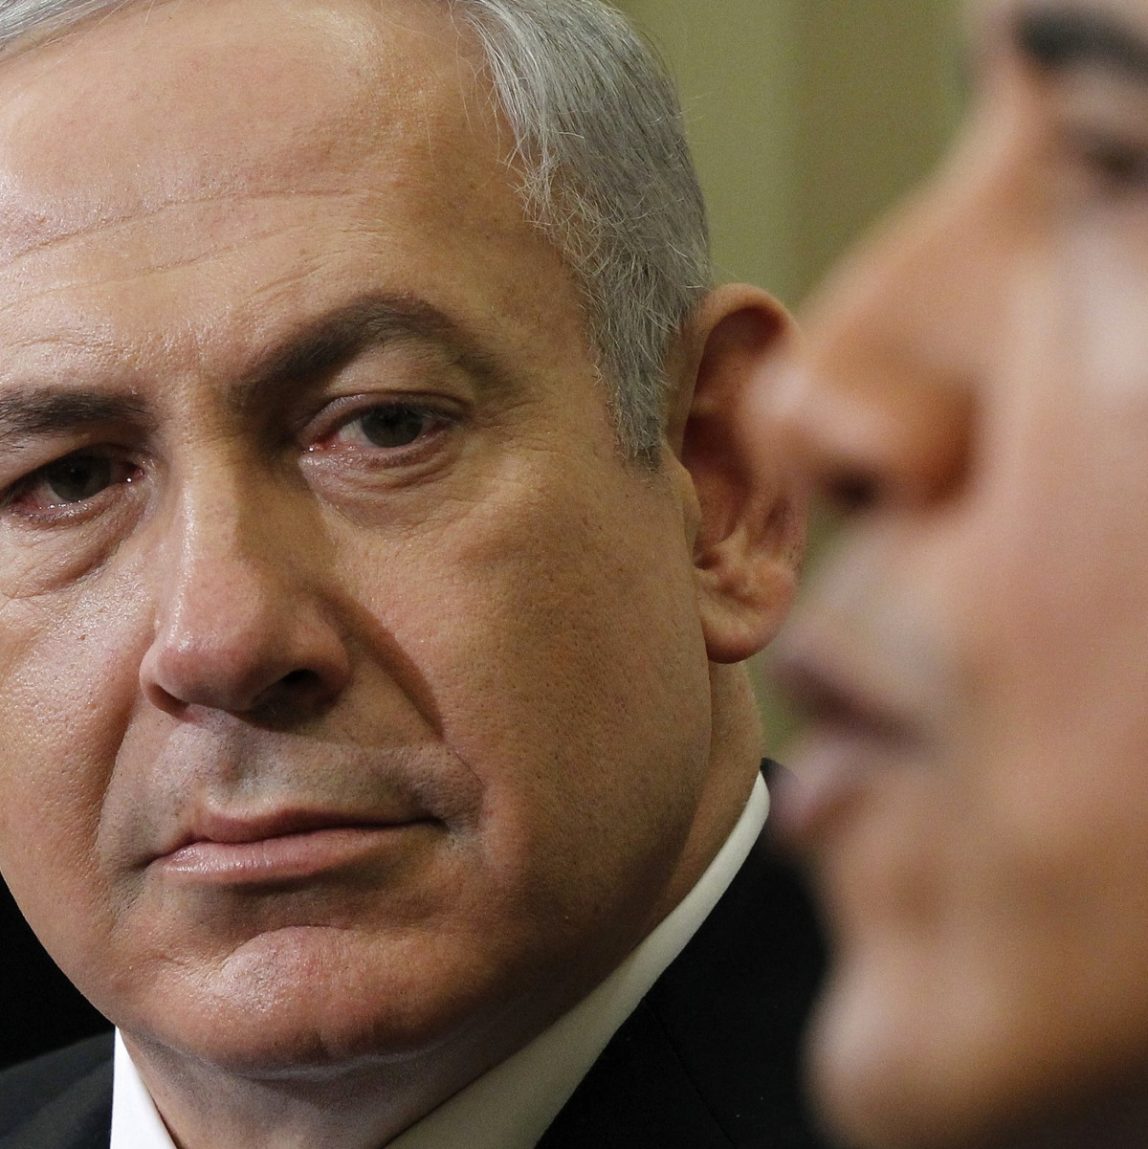 Israeli Prime Minister Benjamin Netanyahu listens as President Barack Obama speaks during their meeting, Monday, March, 5, 2012, in the Oval Office of the White House in Washington. (AP Photo/Pablo Martinez Monsivais)